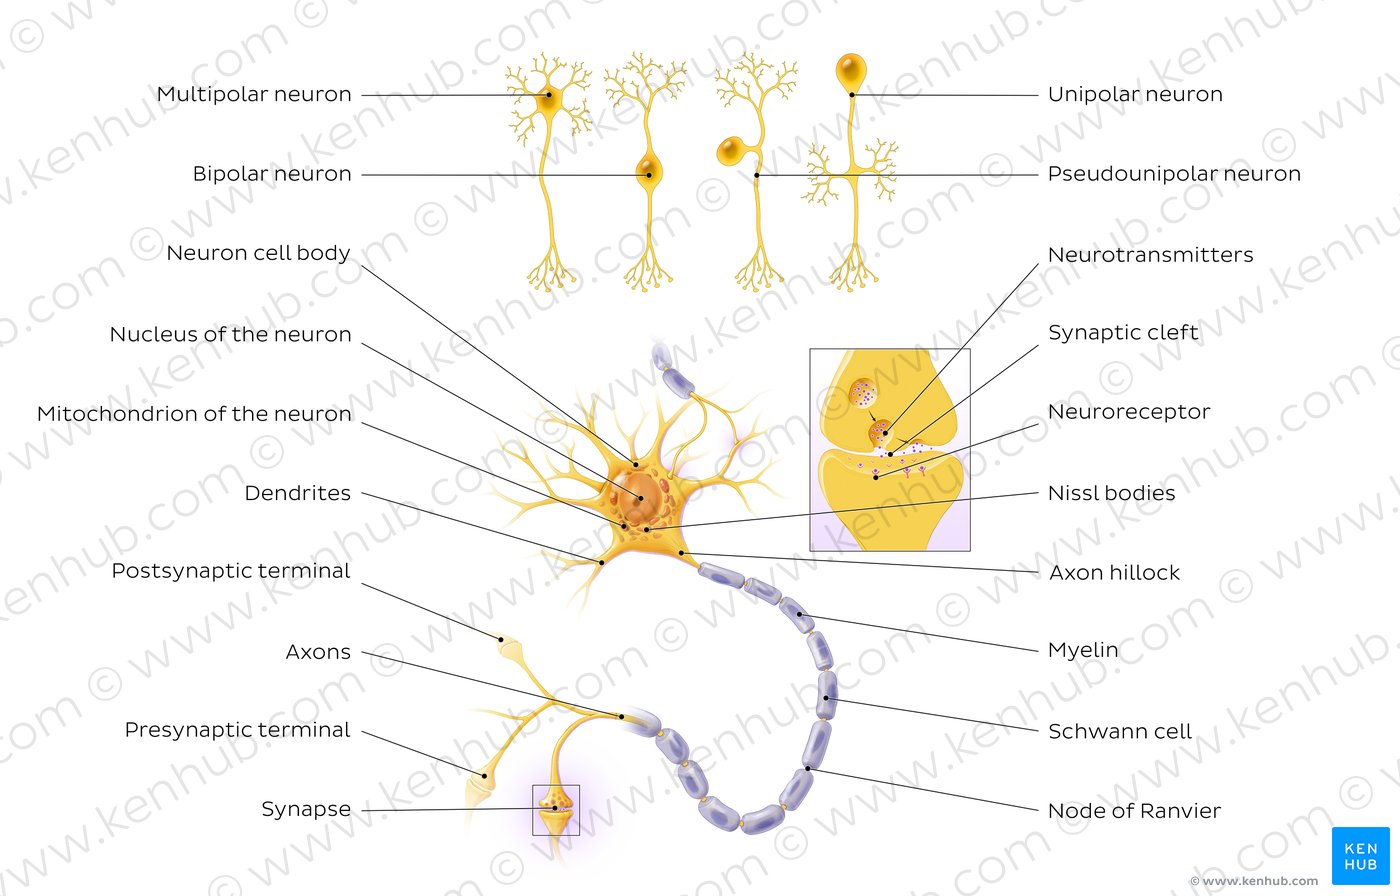 Central Nervous System Diagram : Organization Of The Nervous System / The central nervous system (cns) represents the largest part of the nervous system, including the brain and the spinal cord.